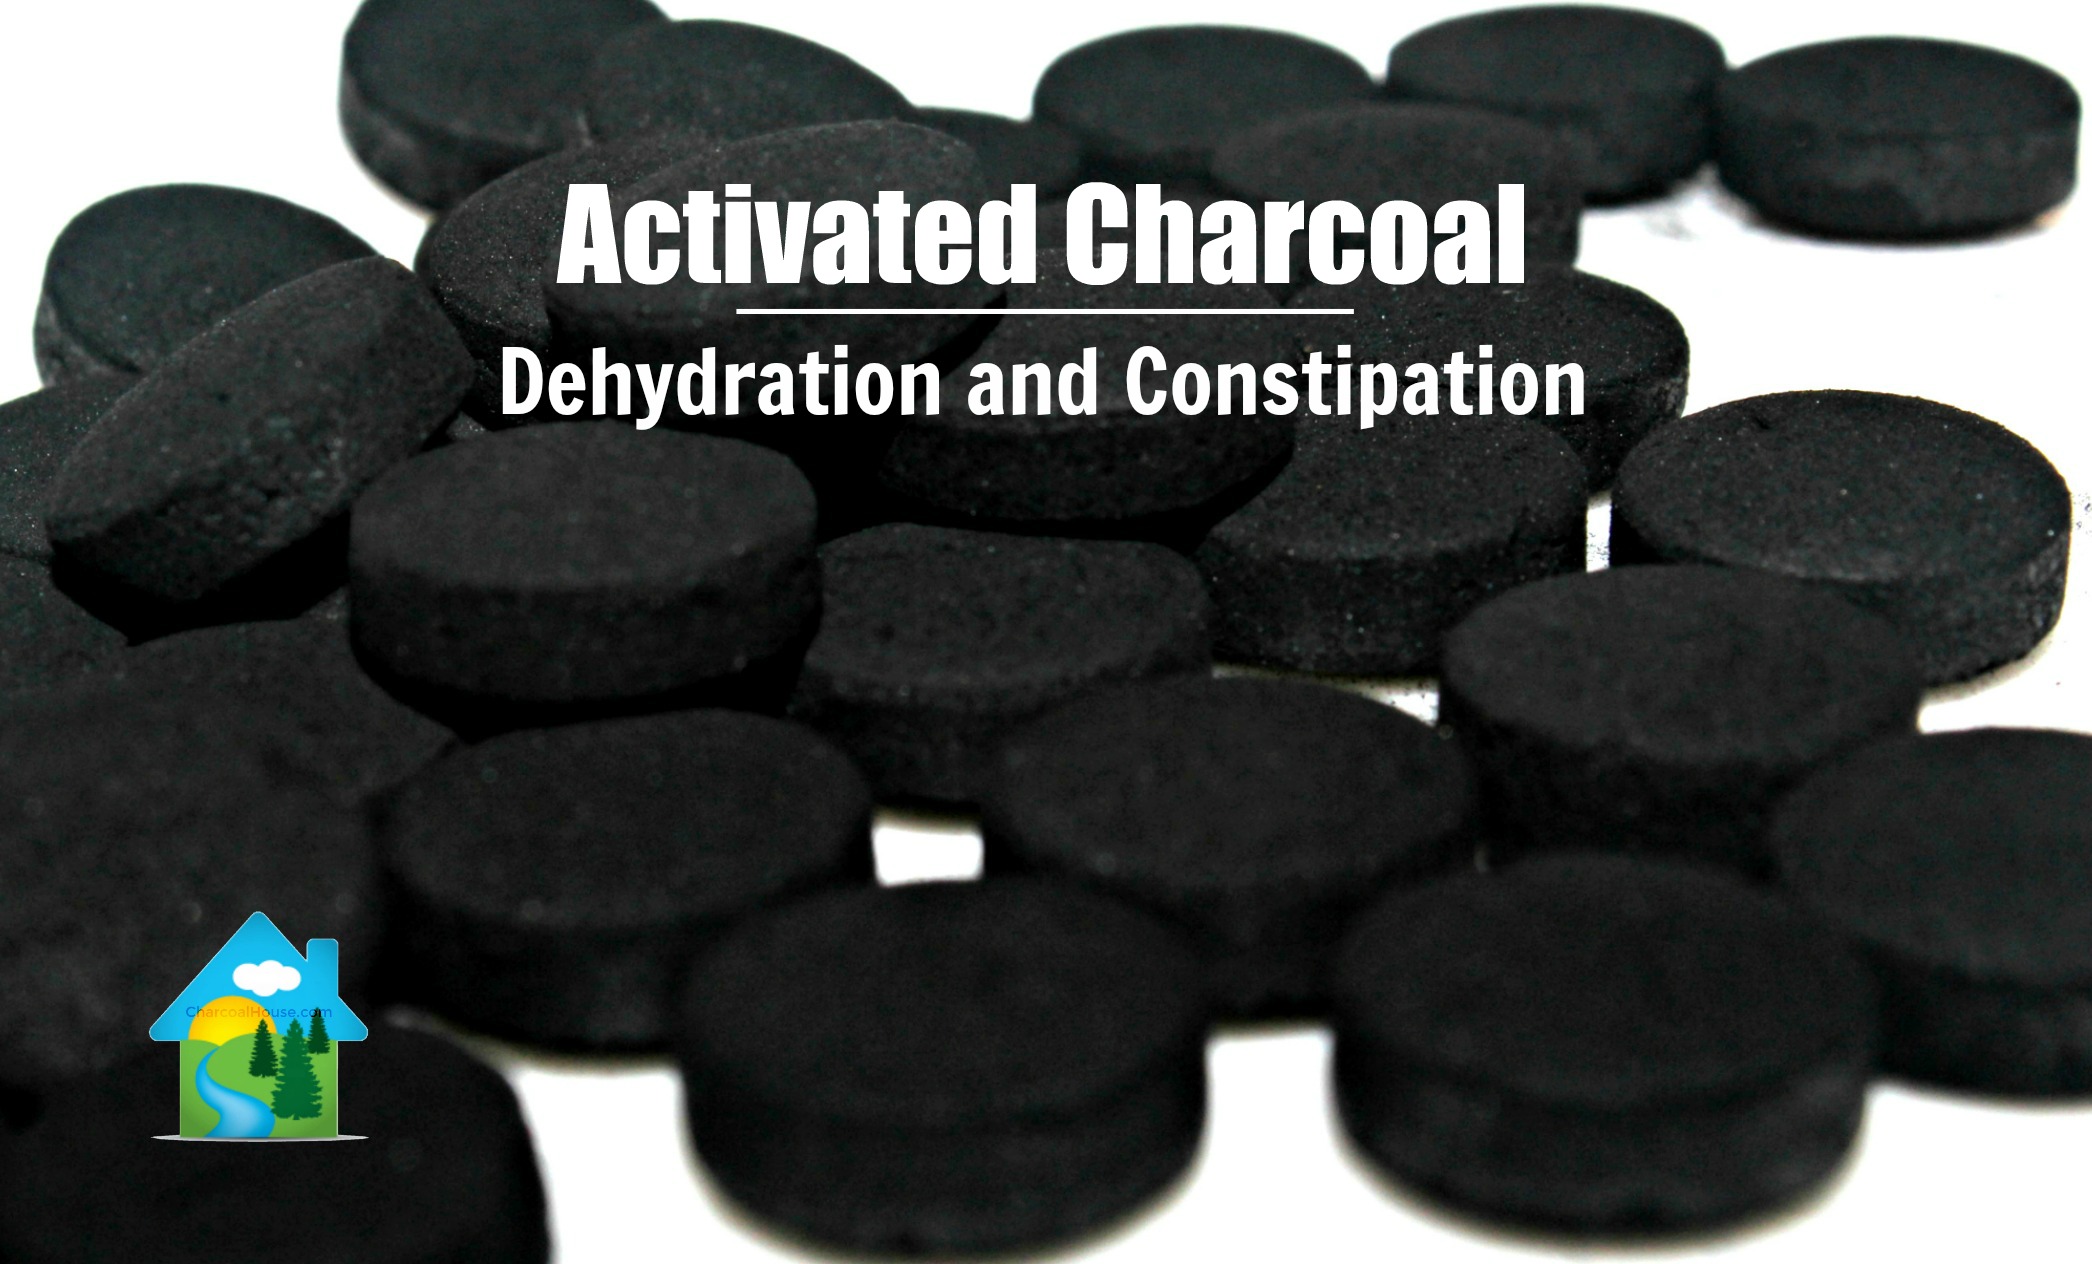 Dehydration and Constipation header - Dehydrated & Constipated when taking Charcoal